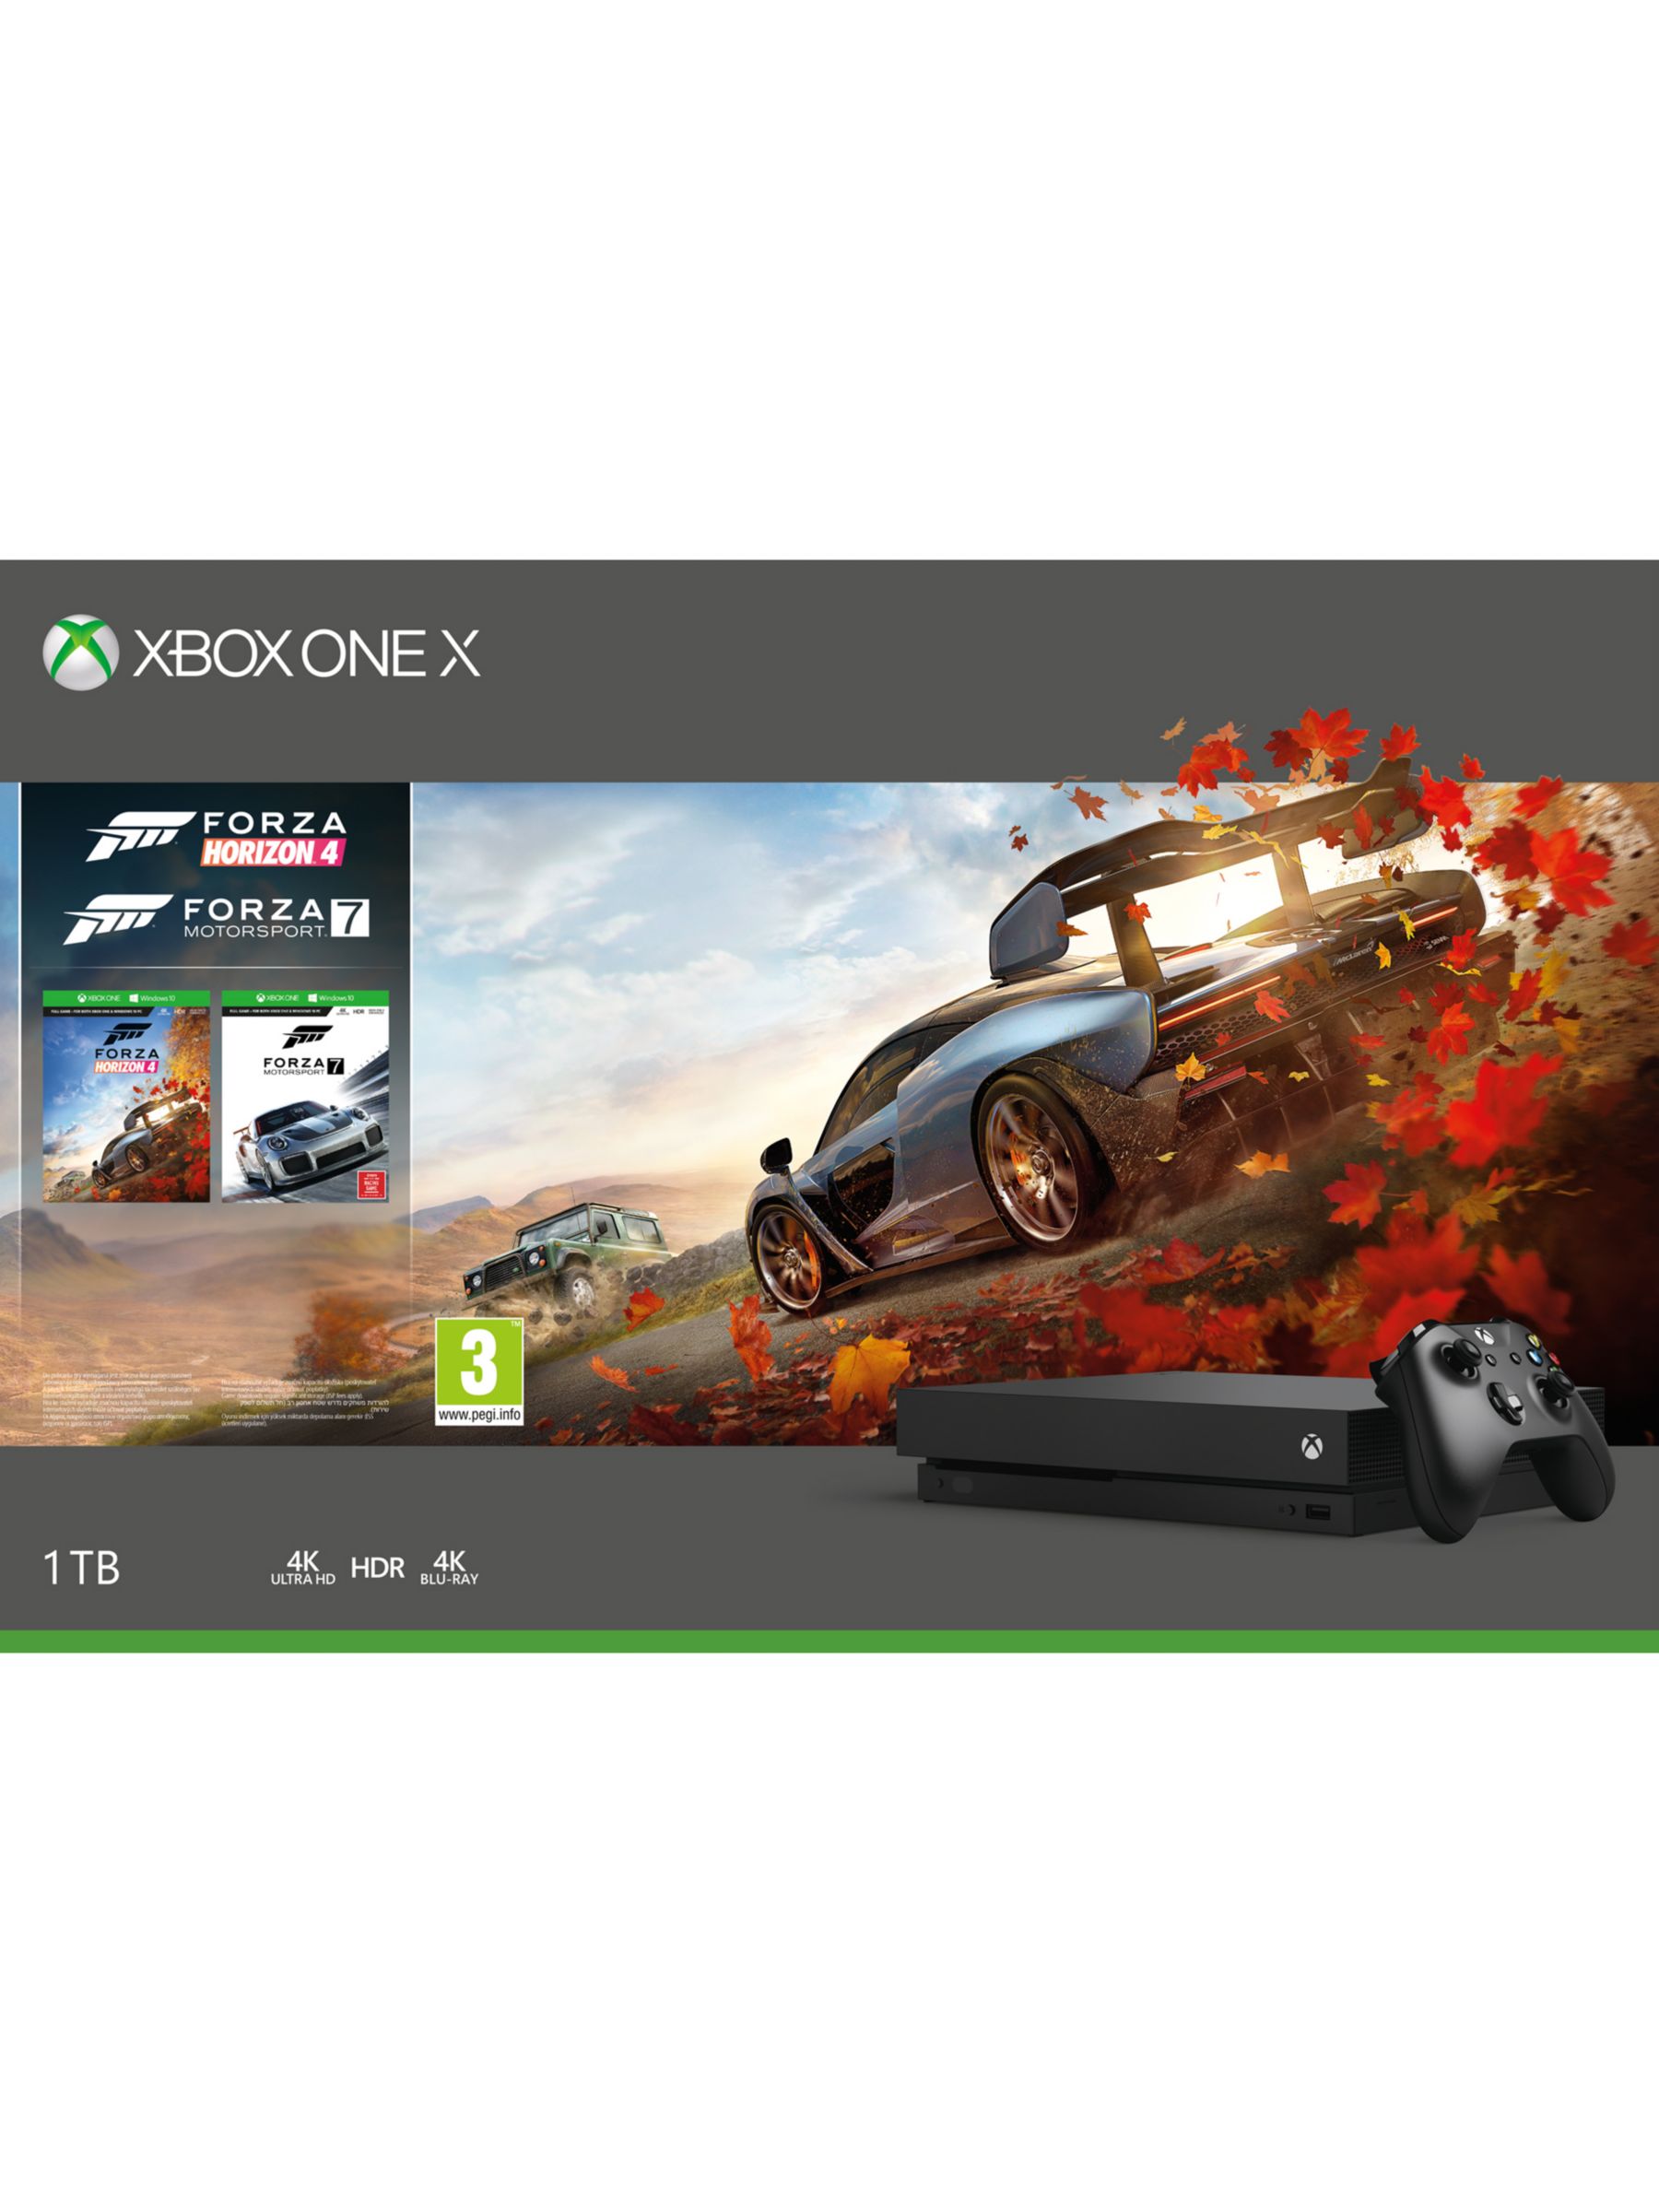 Microsoft Xbox One X Console, 1TB, with Wireless Controller and Forza Horizon 4 + Forza Motorsport 7 Bundle